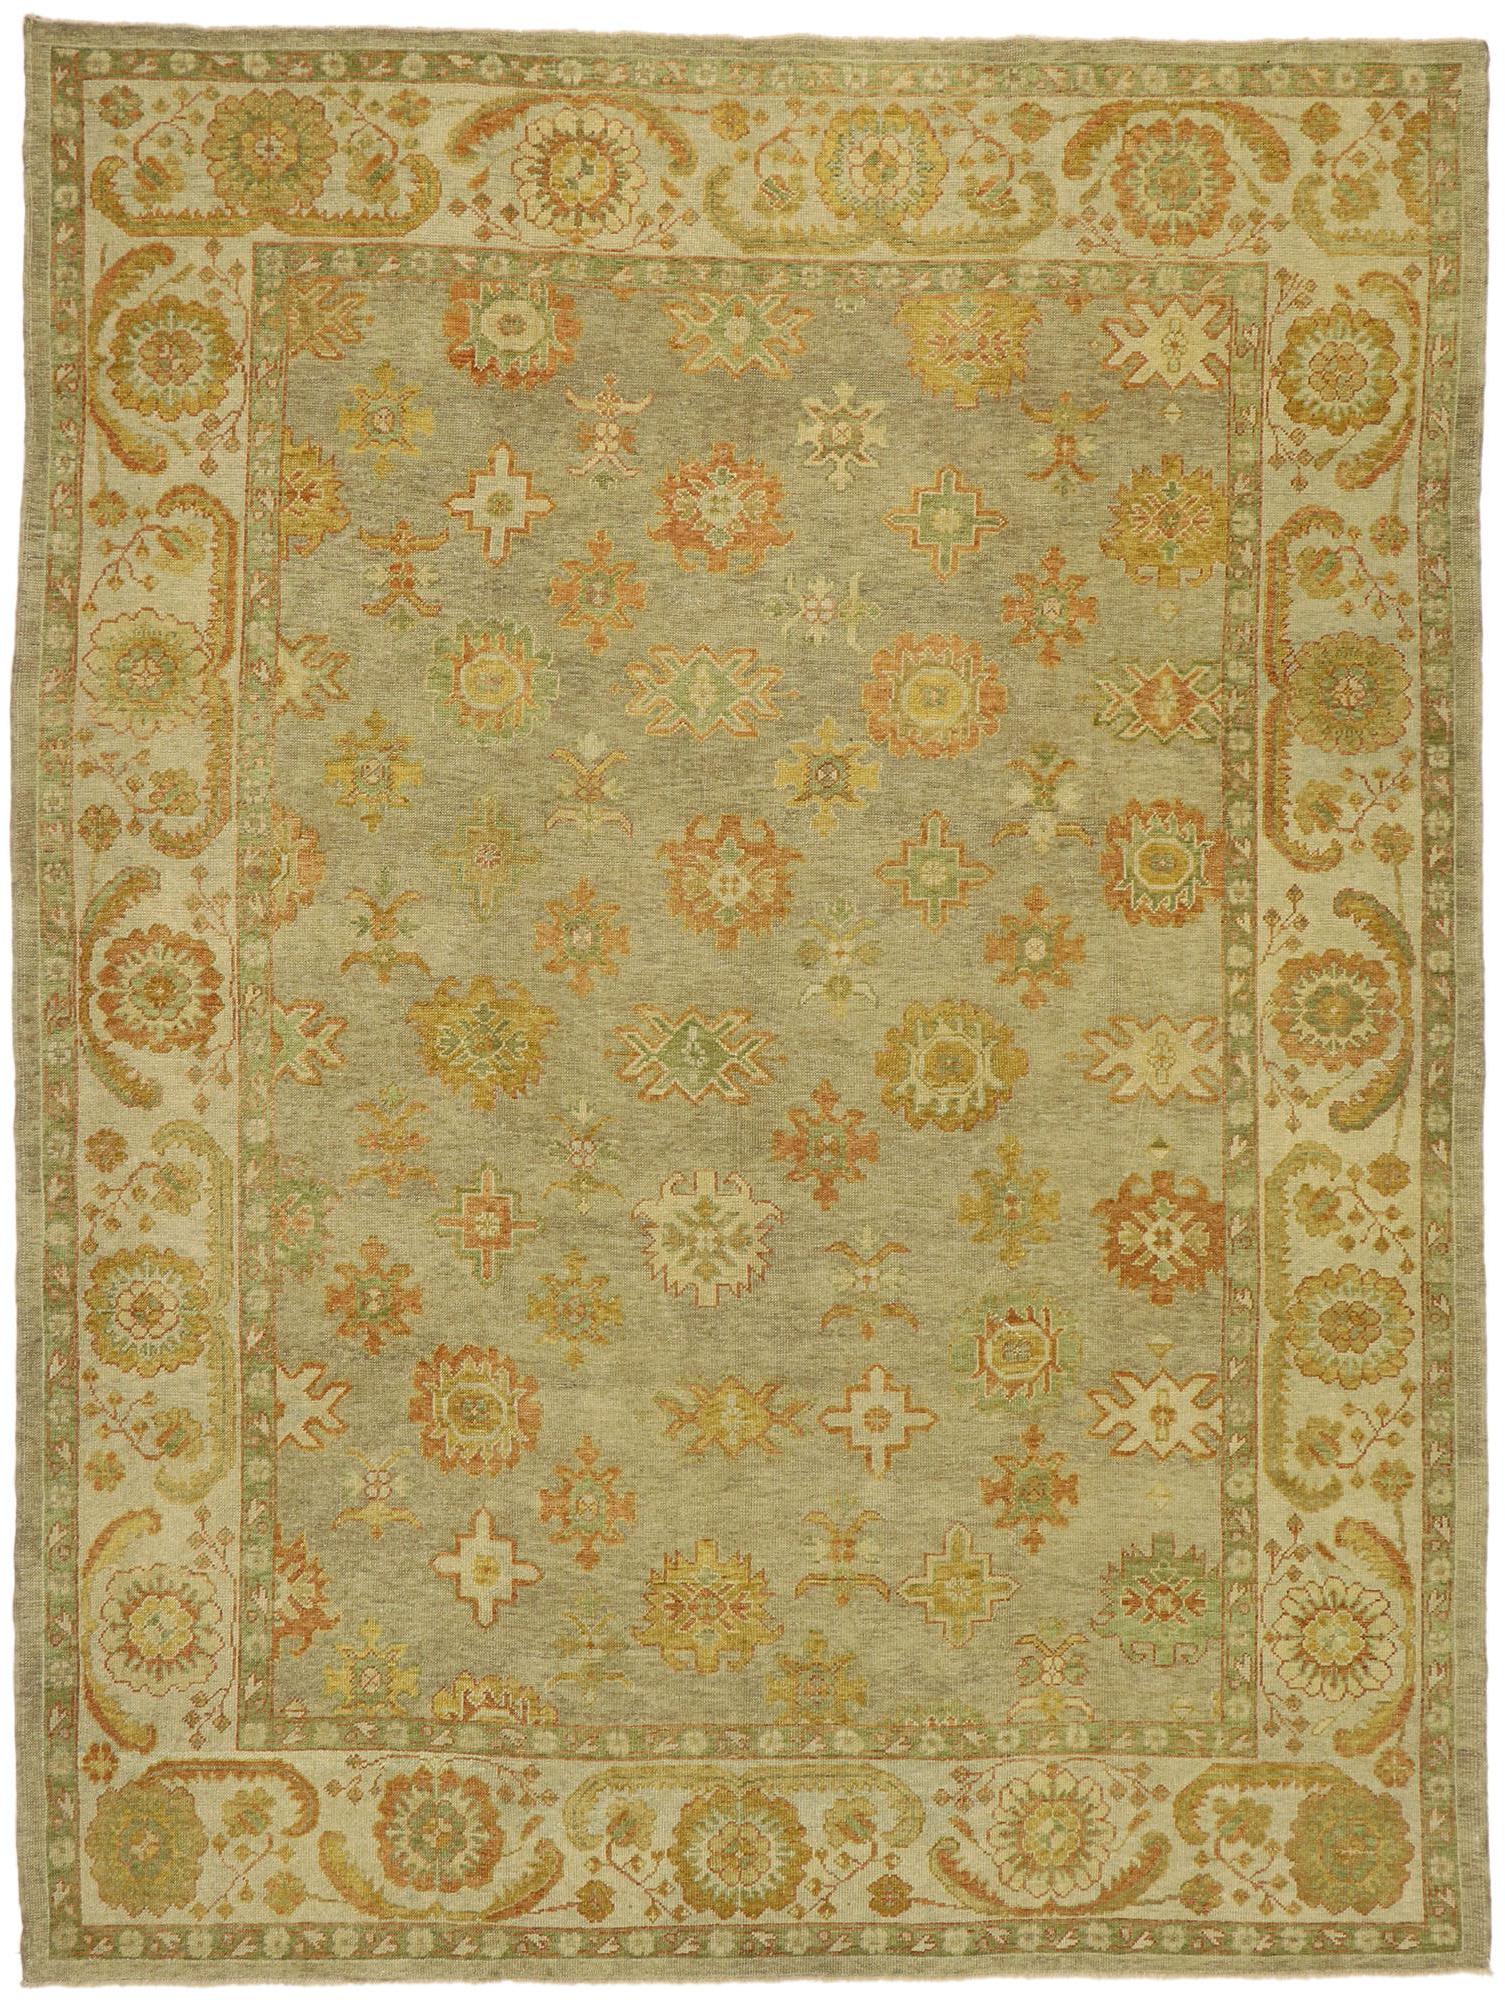 50603 New Contemporary Turkish Oushak Rug with Modern Arts & Crafts Style 09'08 x 12'10. The architectural elements of naturalistic forms and timeless elegance combined with Arts & Crafts style, this hand knotted wool contemporary Turkish Oushak rug